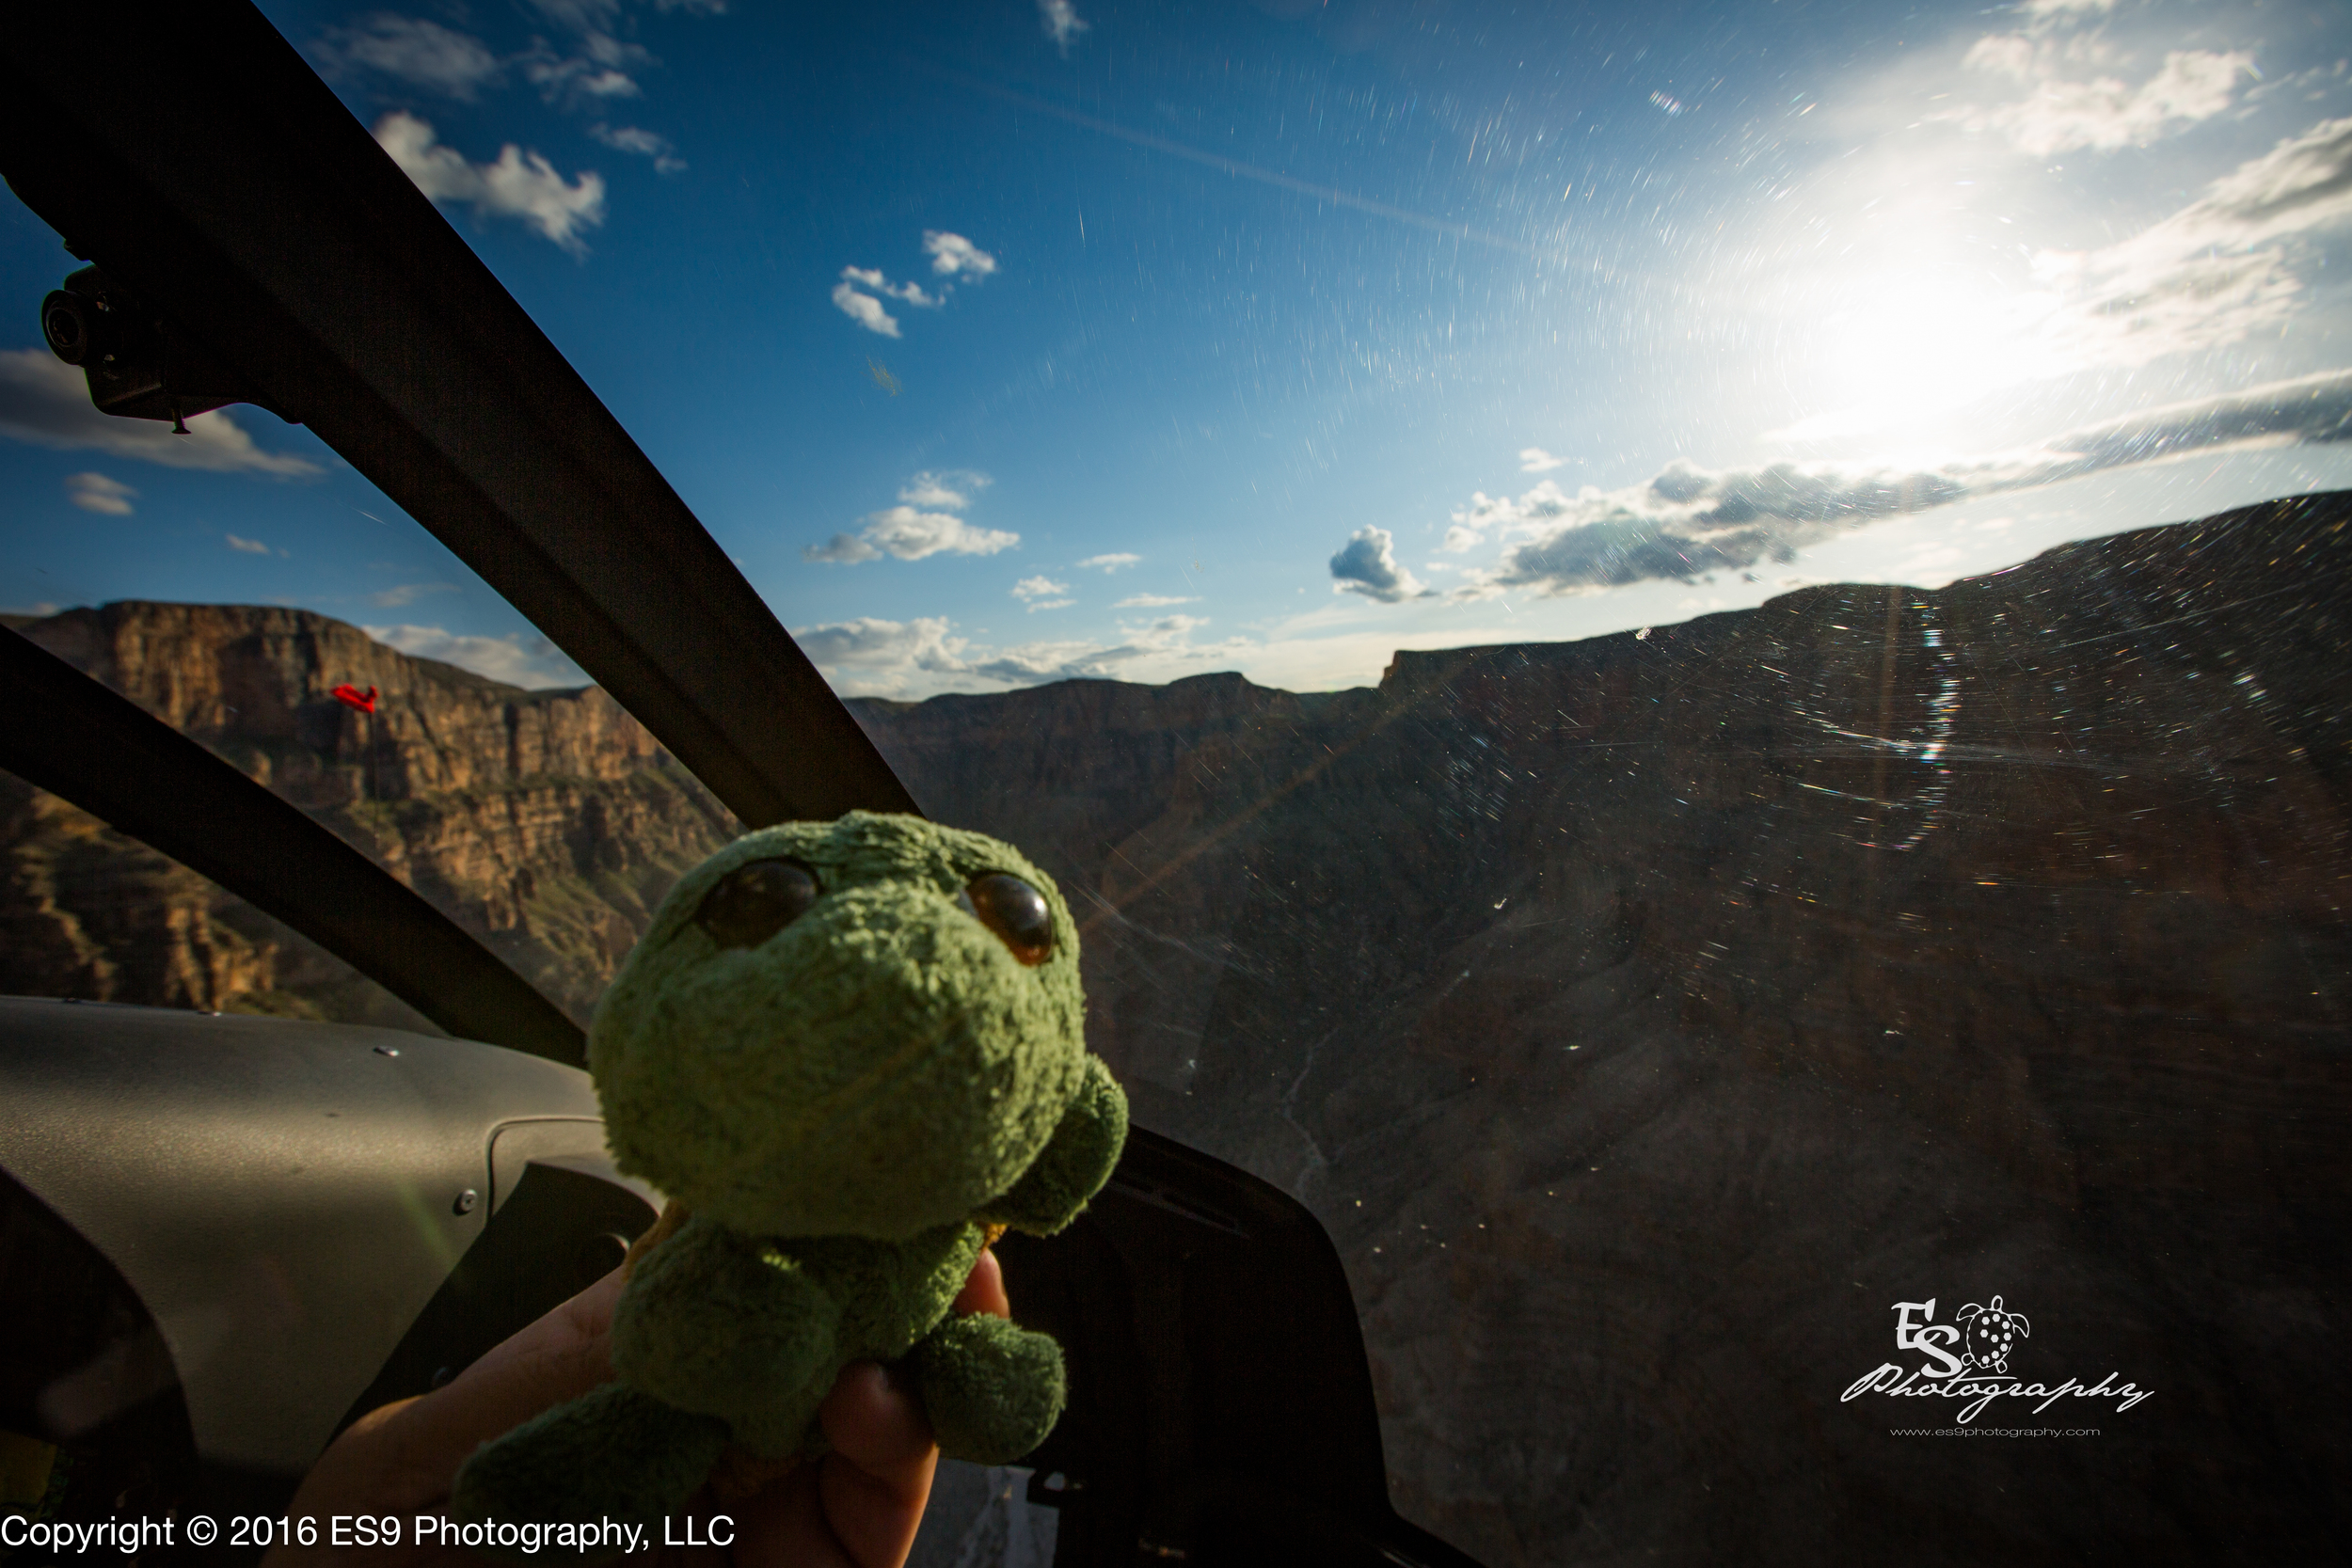 LG Russ onboard Our Helicopter the AIRBUS EC-130 Sundance Helicopter Tour Grand Canyon West @ ES9 Photography 2016.jpg